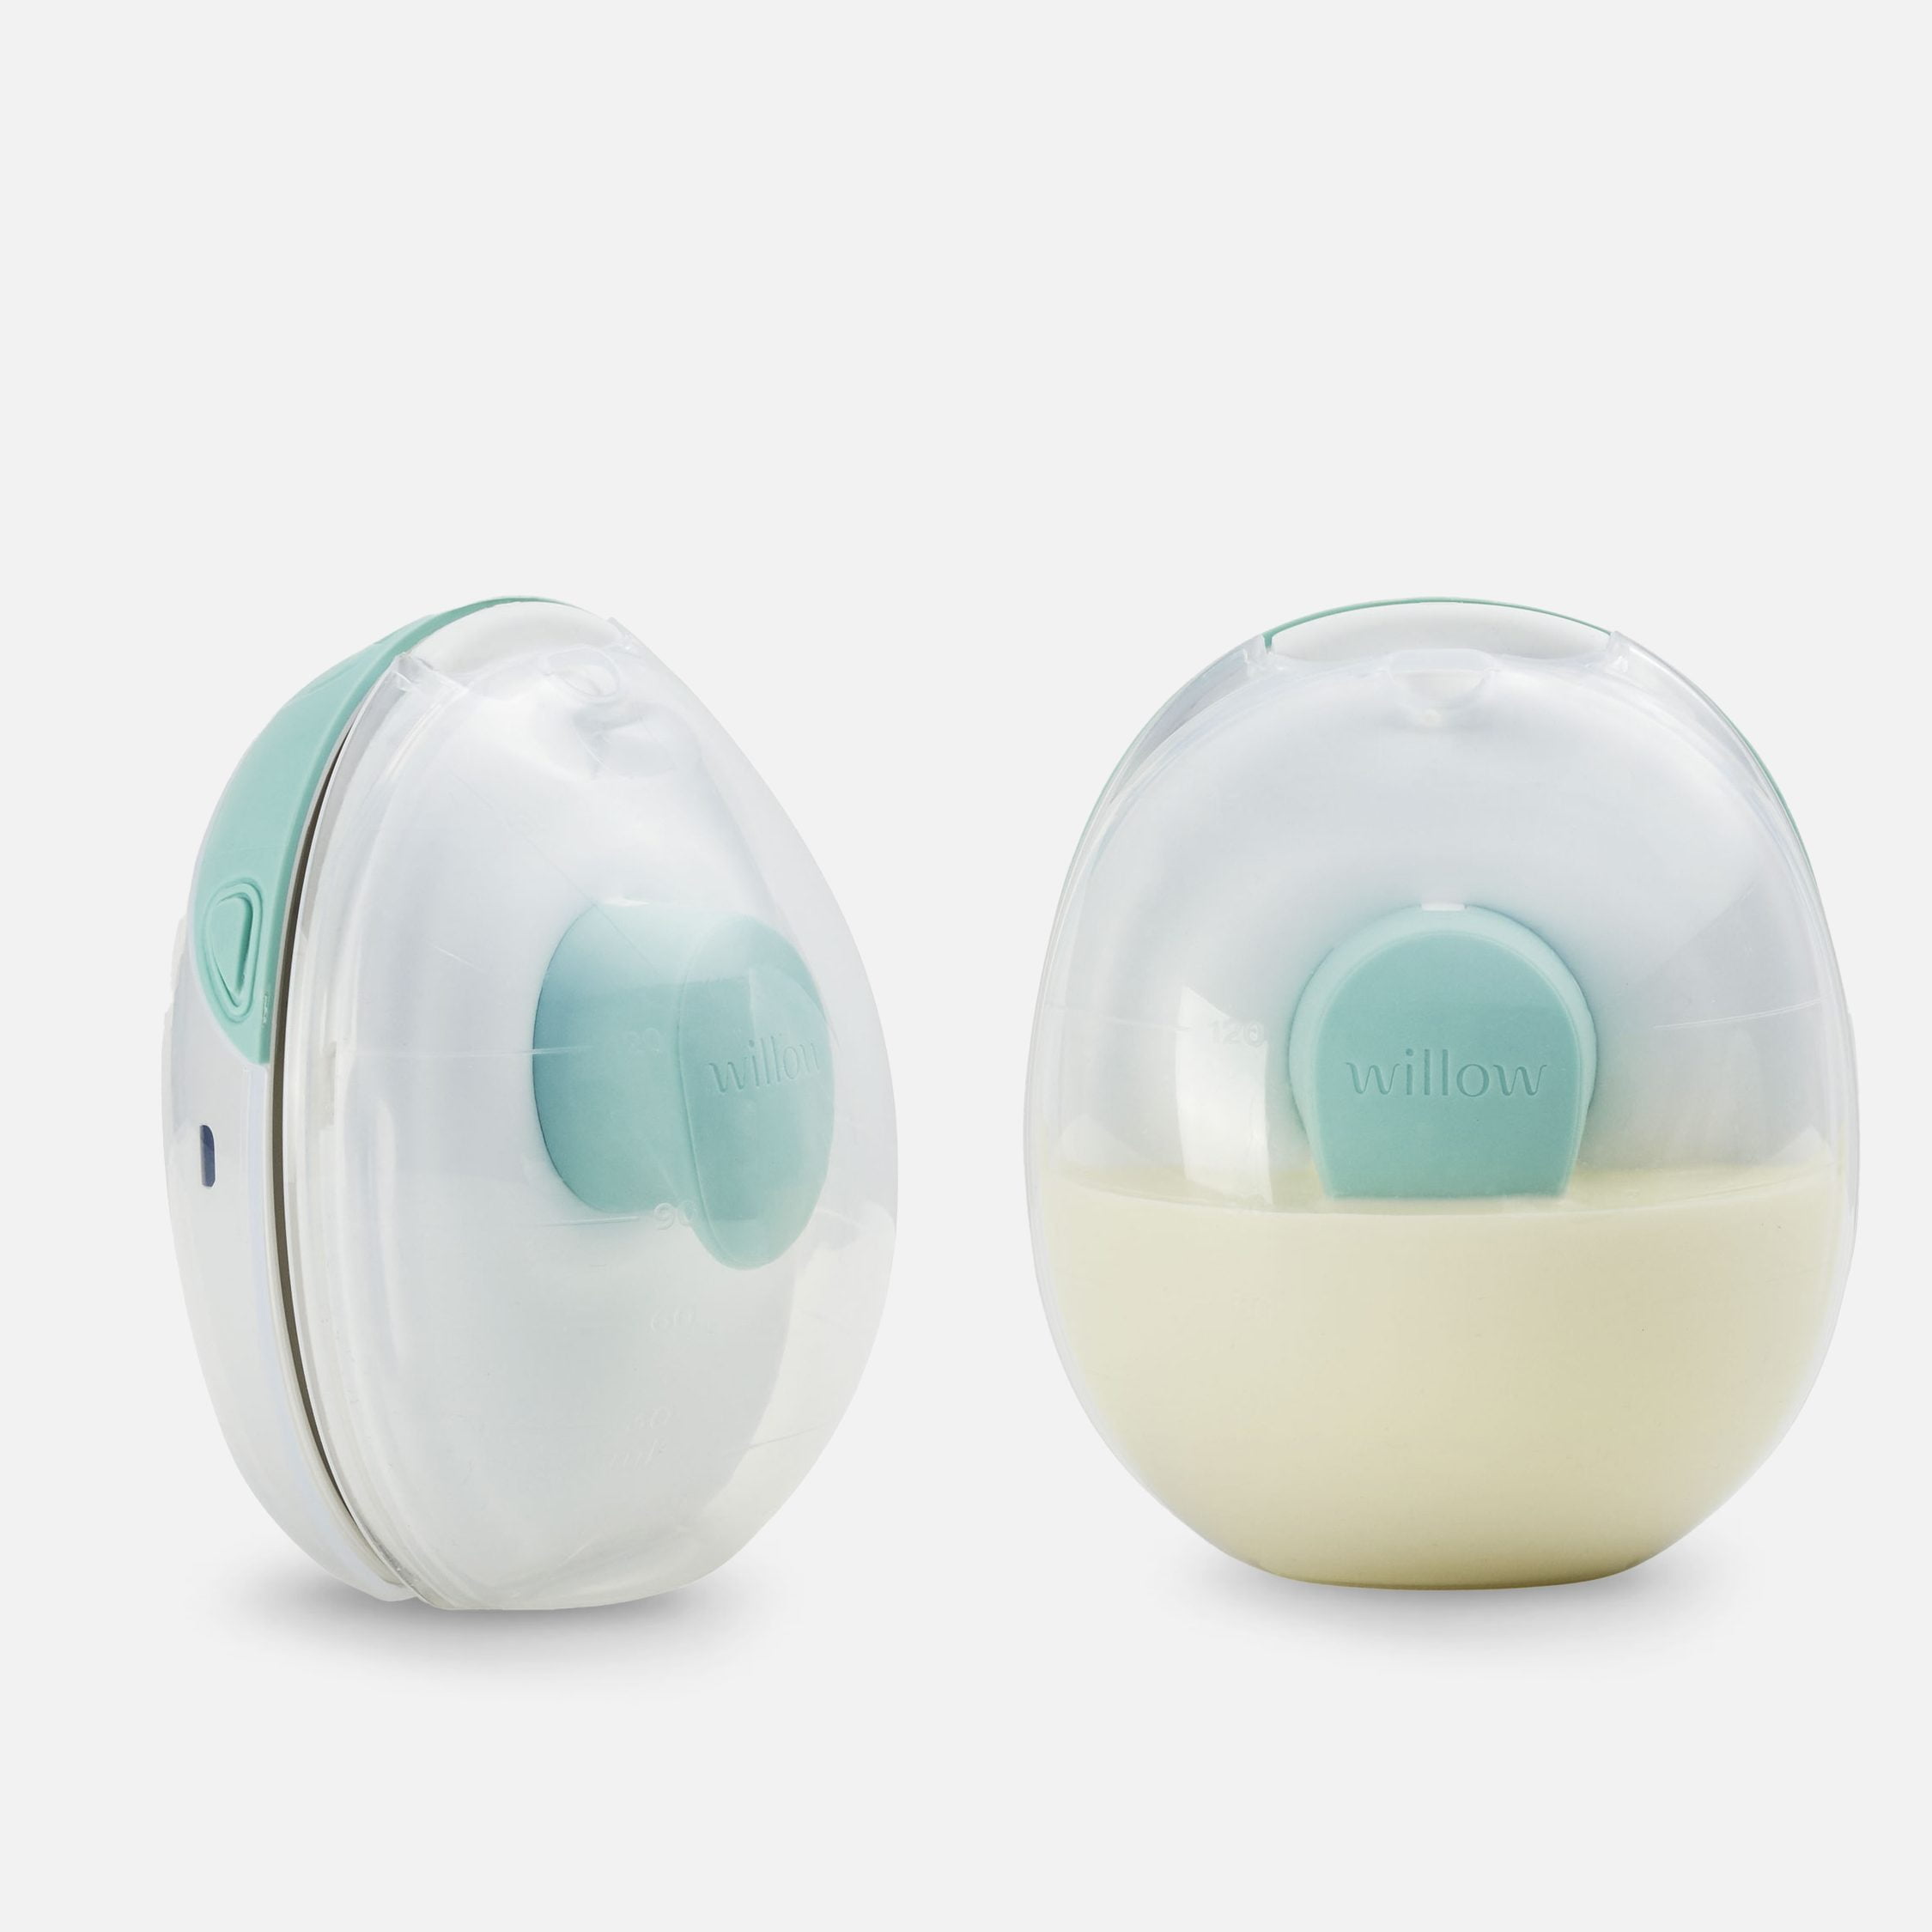 haakaa: Brand of portable silicone breast pumps.